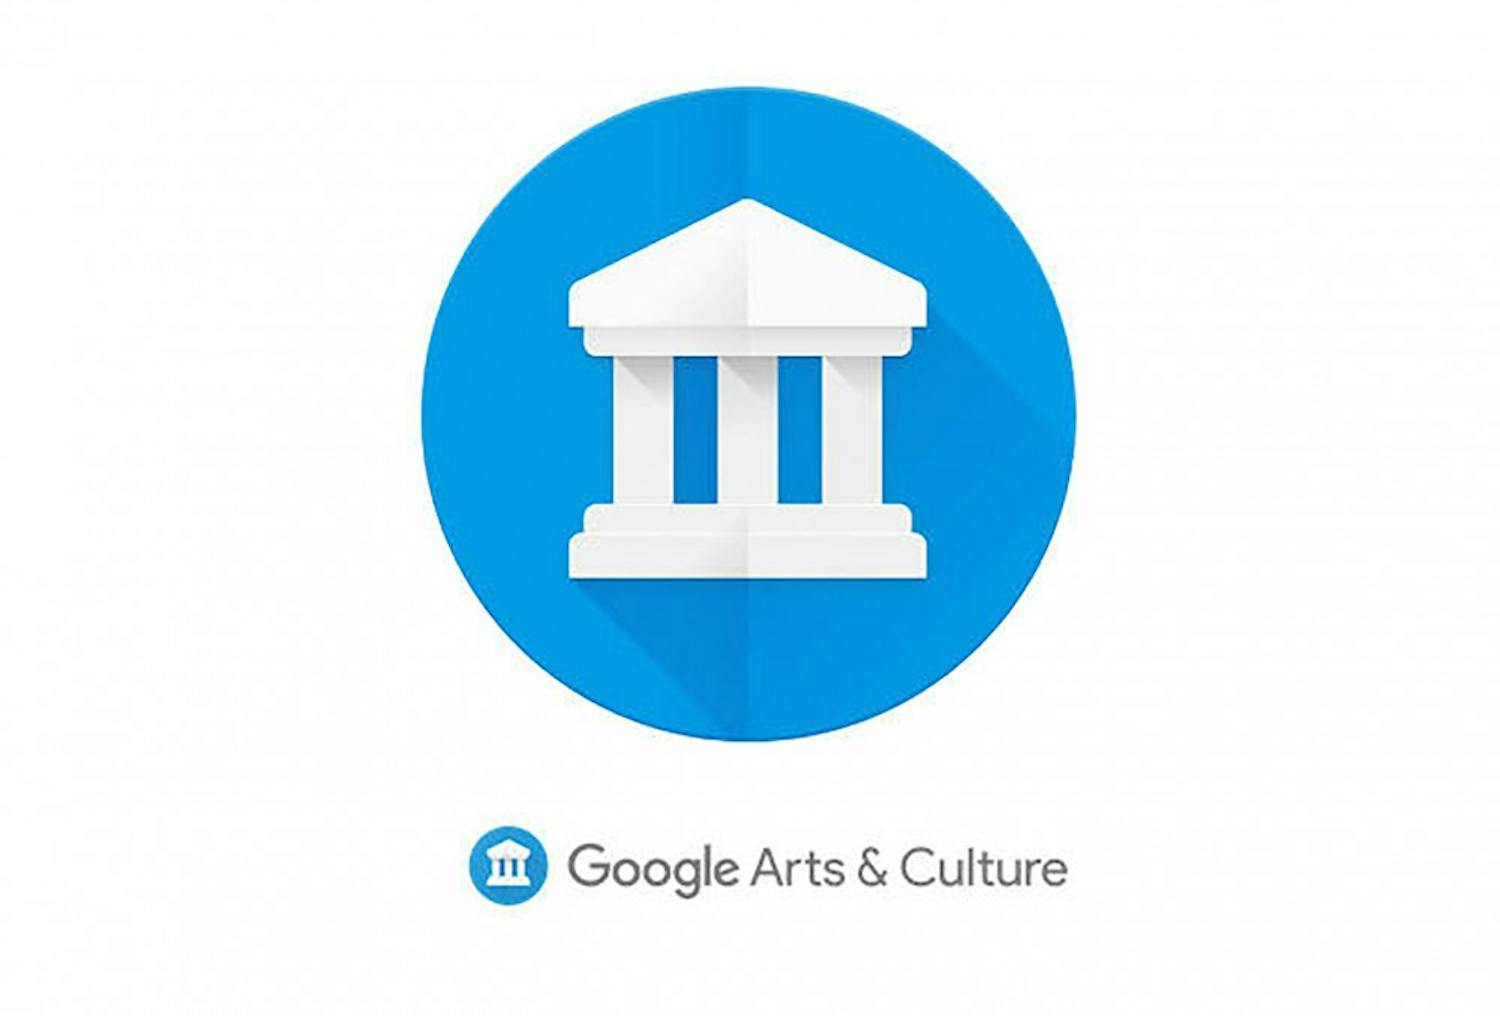 The Albright-Knox Art Gallery announced a recent collaboration with Google Arts and Culture, allowing access to a multitude of works from the gallery to be viewable online.